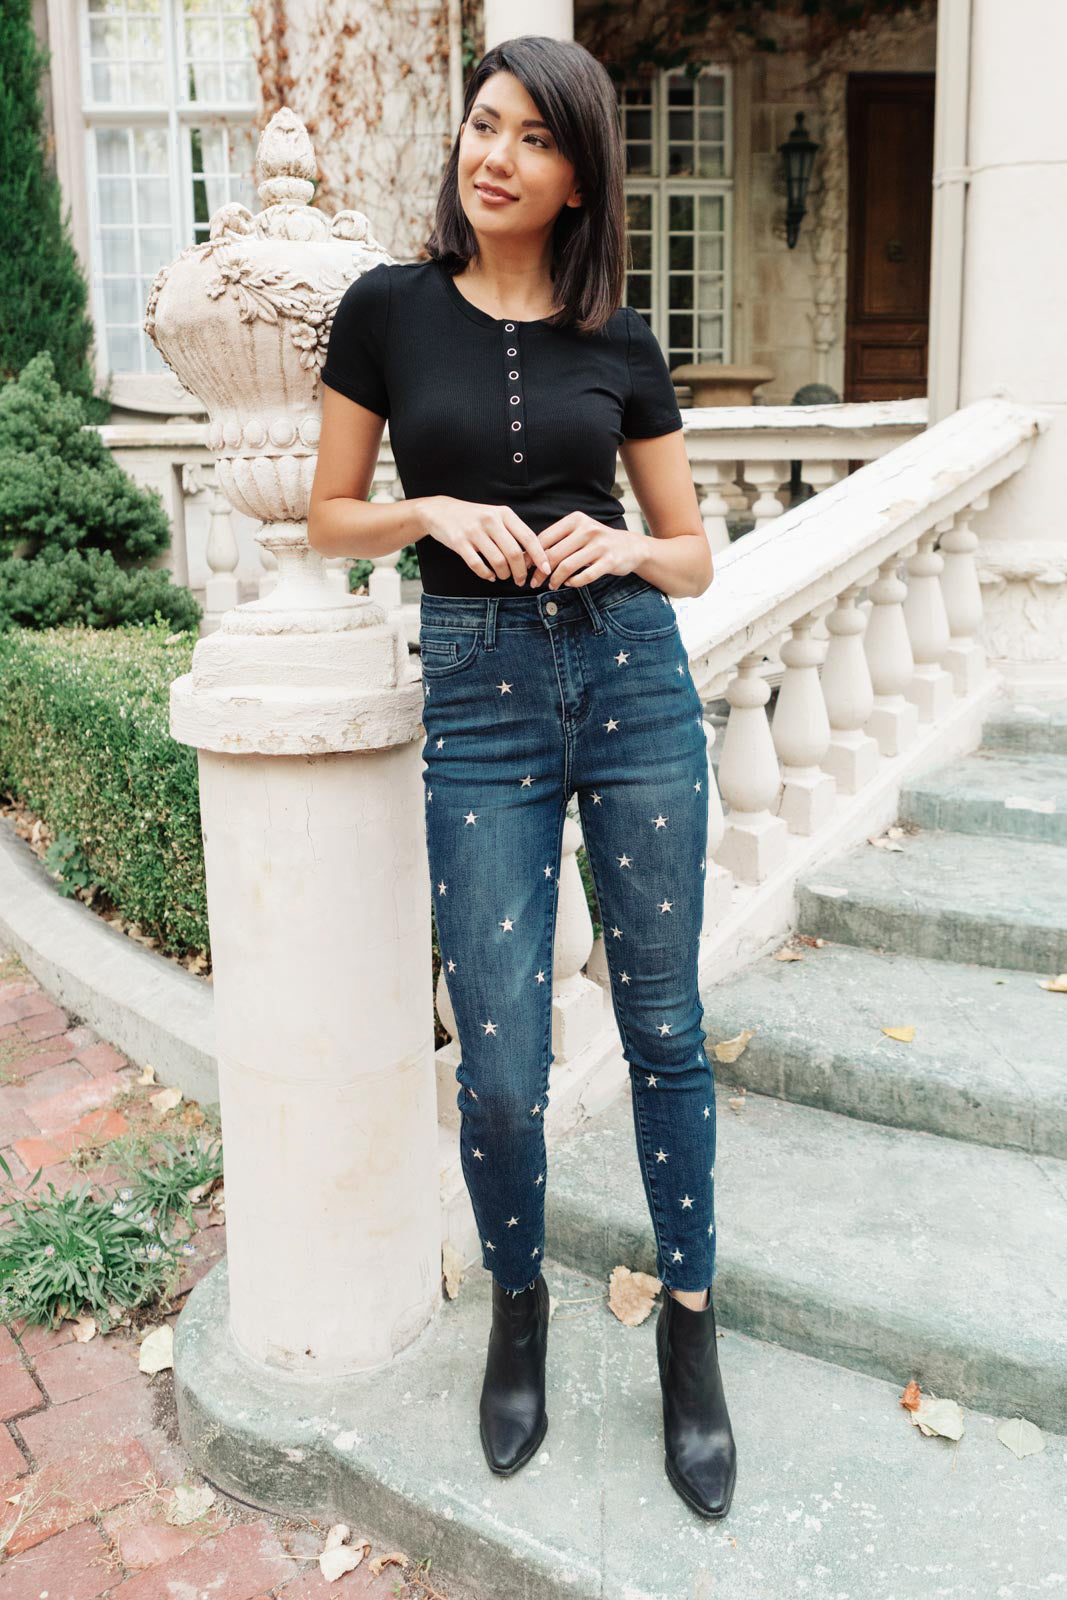 star skinny dark judy blue jeans, modest clothing, modest clothes